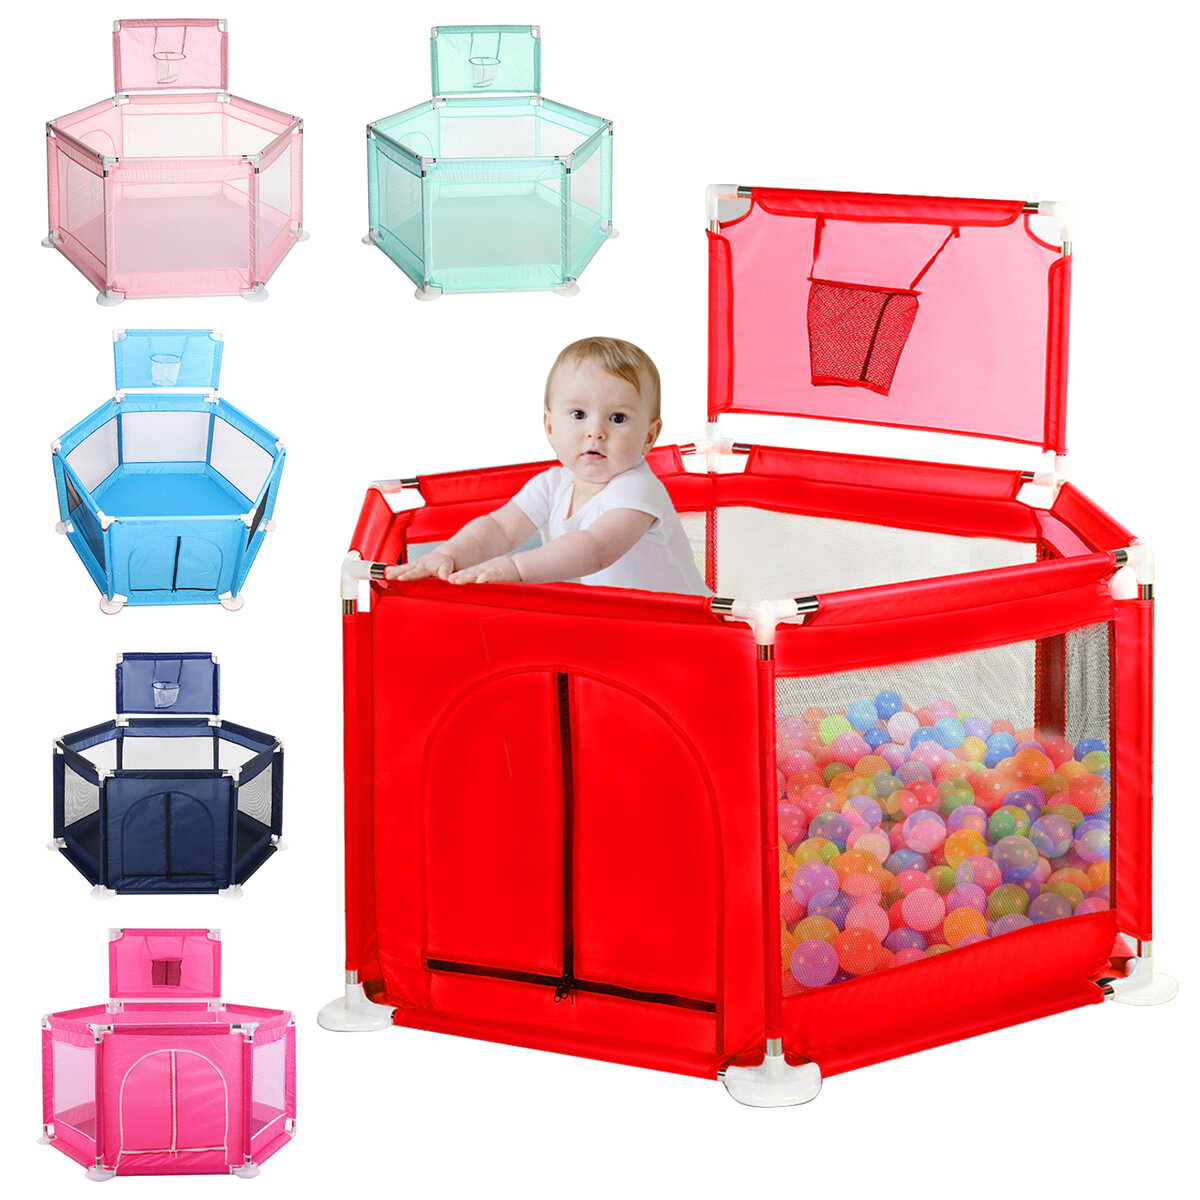 Image of 2 in 1 6-Sided Baby Playpen with ball frame Toddler Children Play Yardsfor Children Under 36 Months Tent Basketball Cour